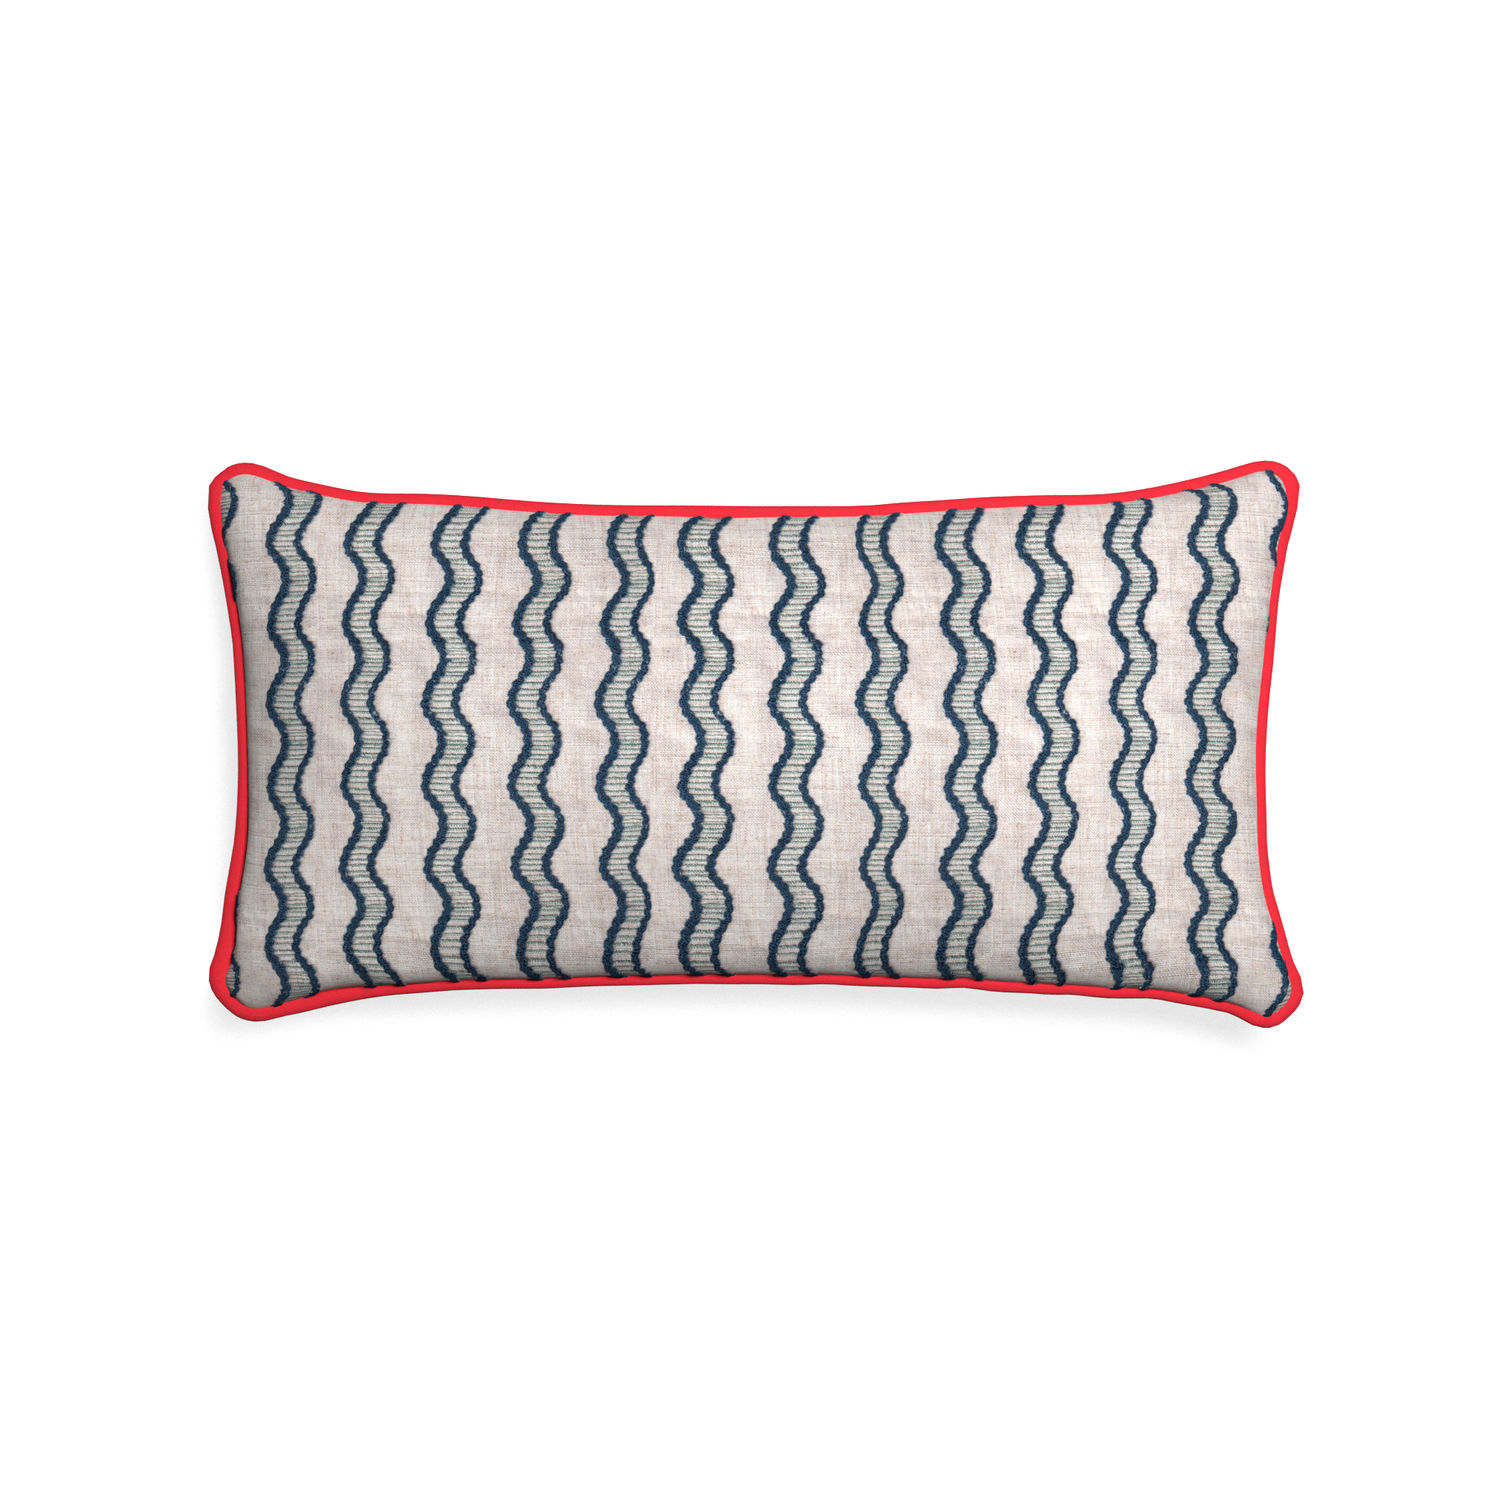 Midi-lumbar beatrice custom embroidered wavepillow with cherry piping on white background